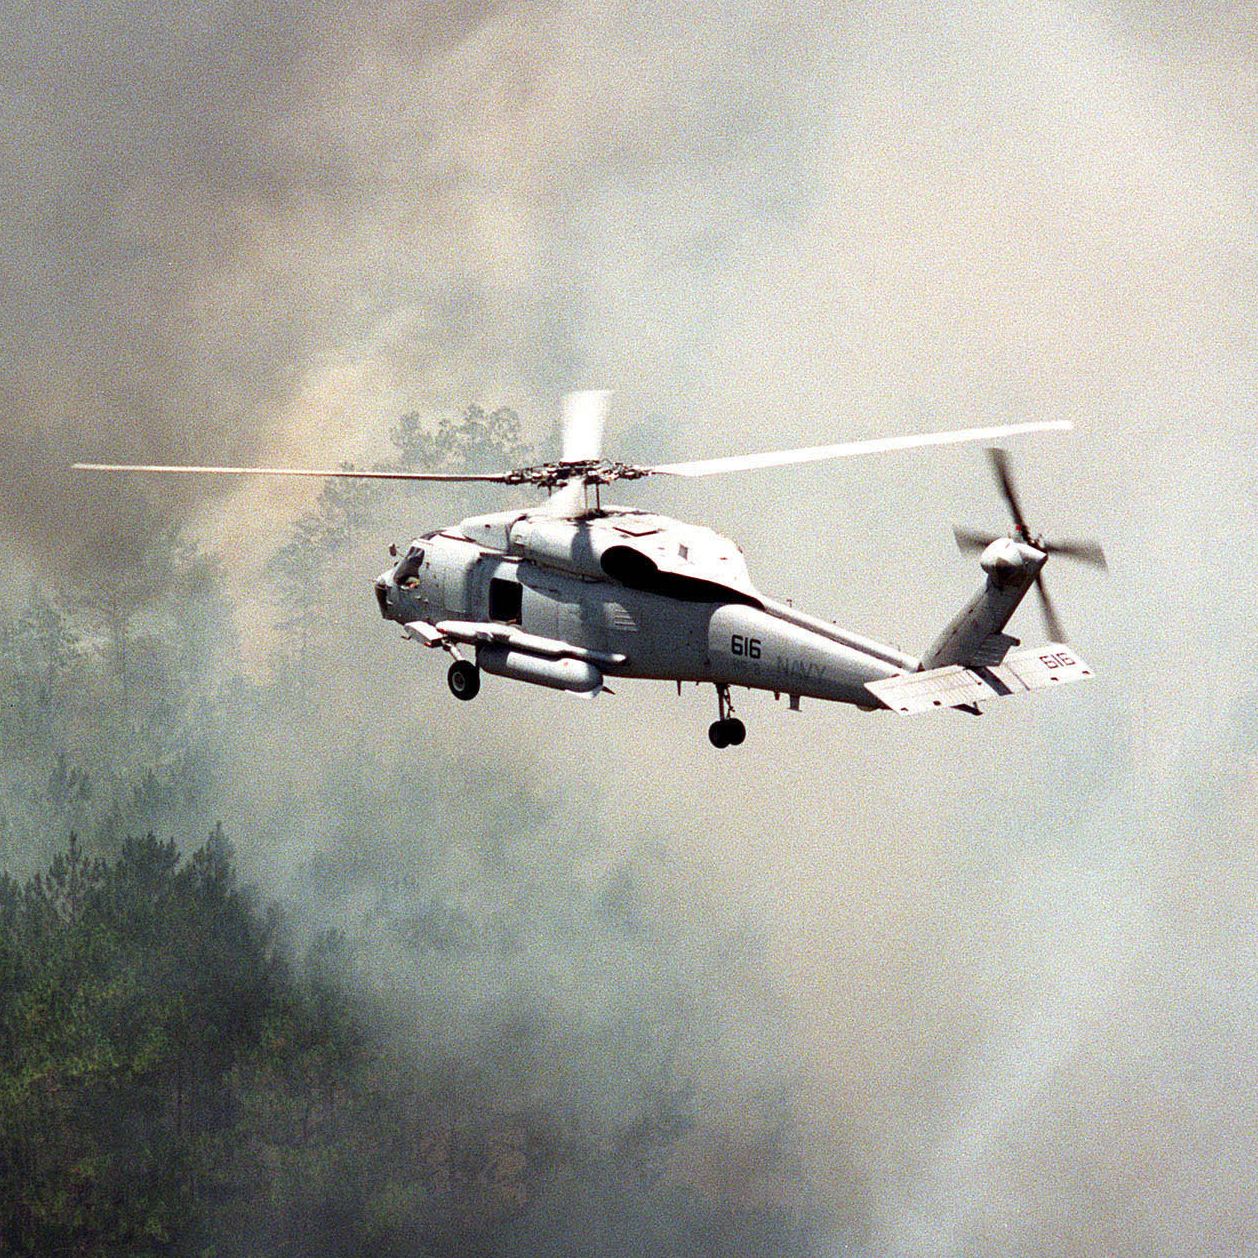 980617 n 0000c 004 jacksonville, florida june 17th, 1998    a navy sh 60f "sea hawk" from helicopter antisubmarine squadron 3 hs 3 conducts air searches for local fire fighting authorities in the greater jacksonville area navy helicopters deployed to provide aerial reconnaissance for better deployment of fire fighting teams the jacksonville area has suffered from a severe drought, causing wildfires  photo by us navygetty images